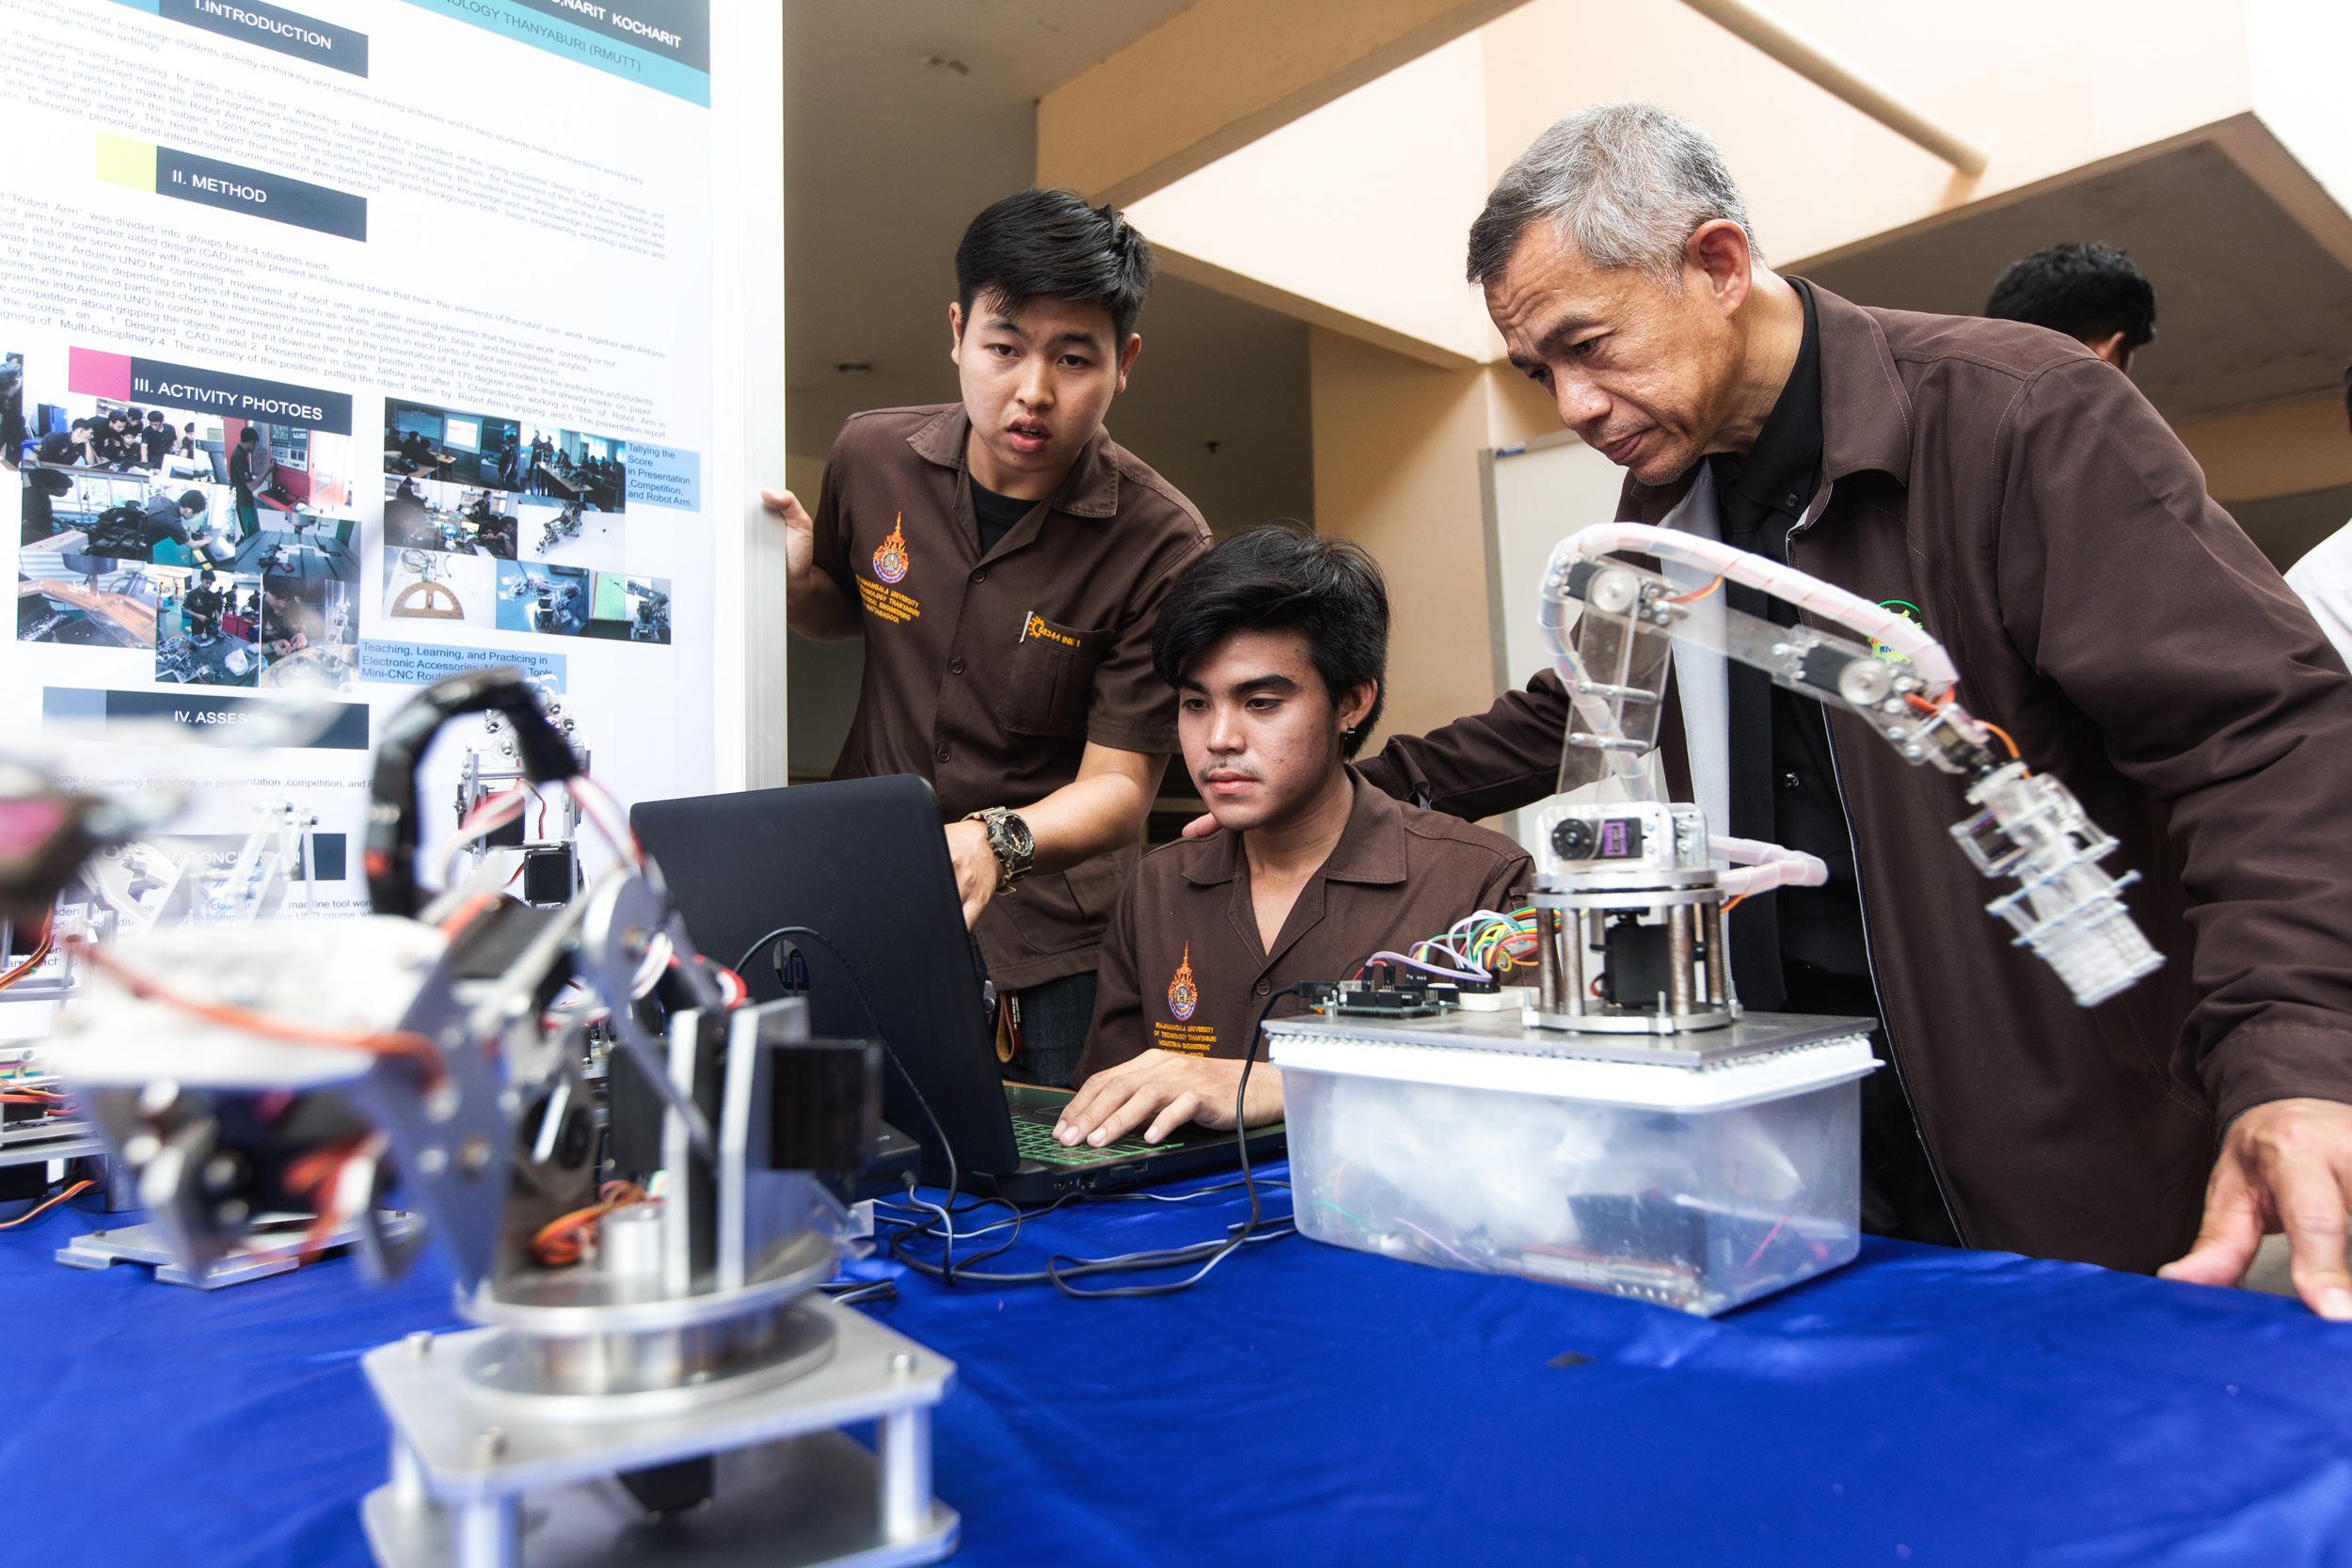  As part of CDIO’s active learning, students design and build real-world solutions. Industrial Engineering students Takonkiat Arirob (centre), 23, and Udomsak Wattanagool, 22, carry out a demonstration of the robotic arm they created with supervision